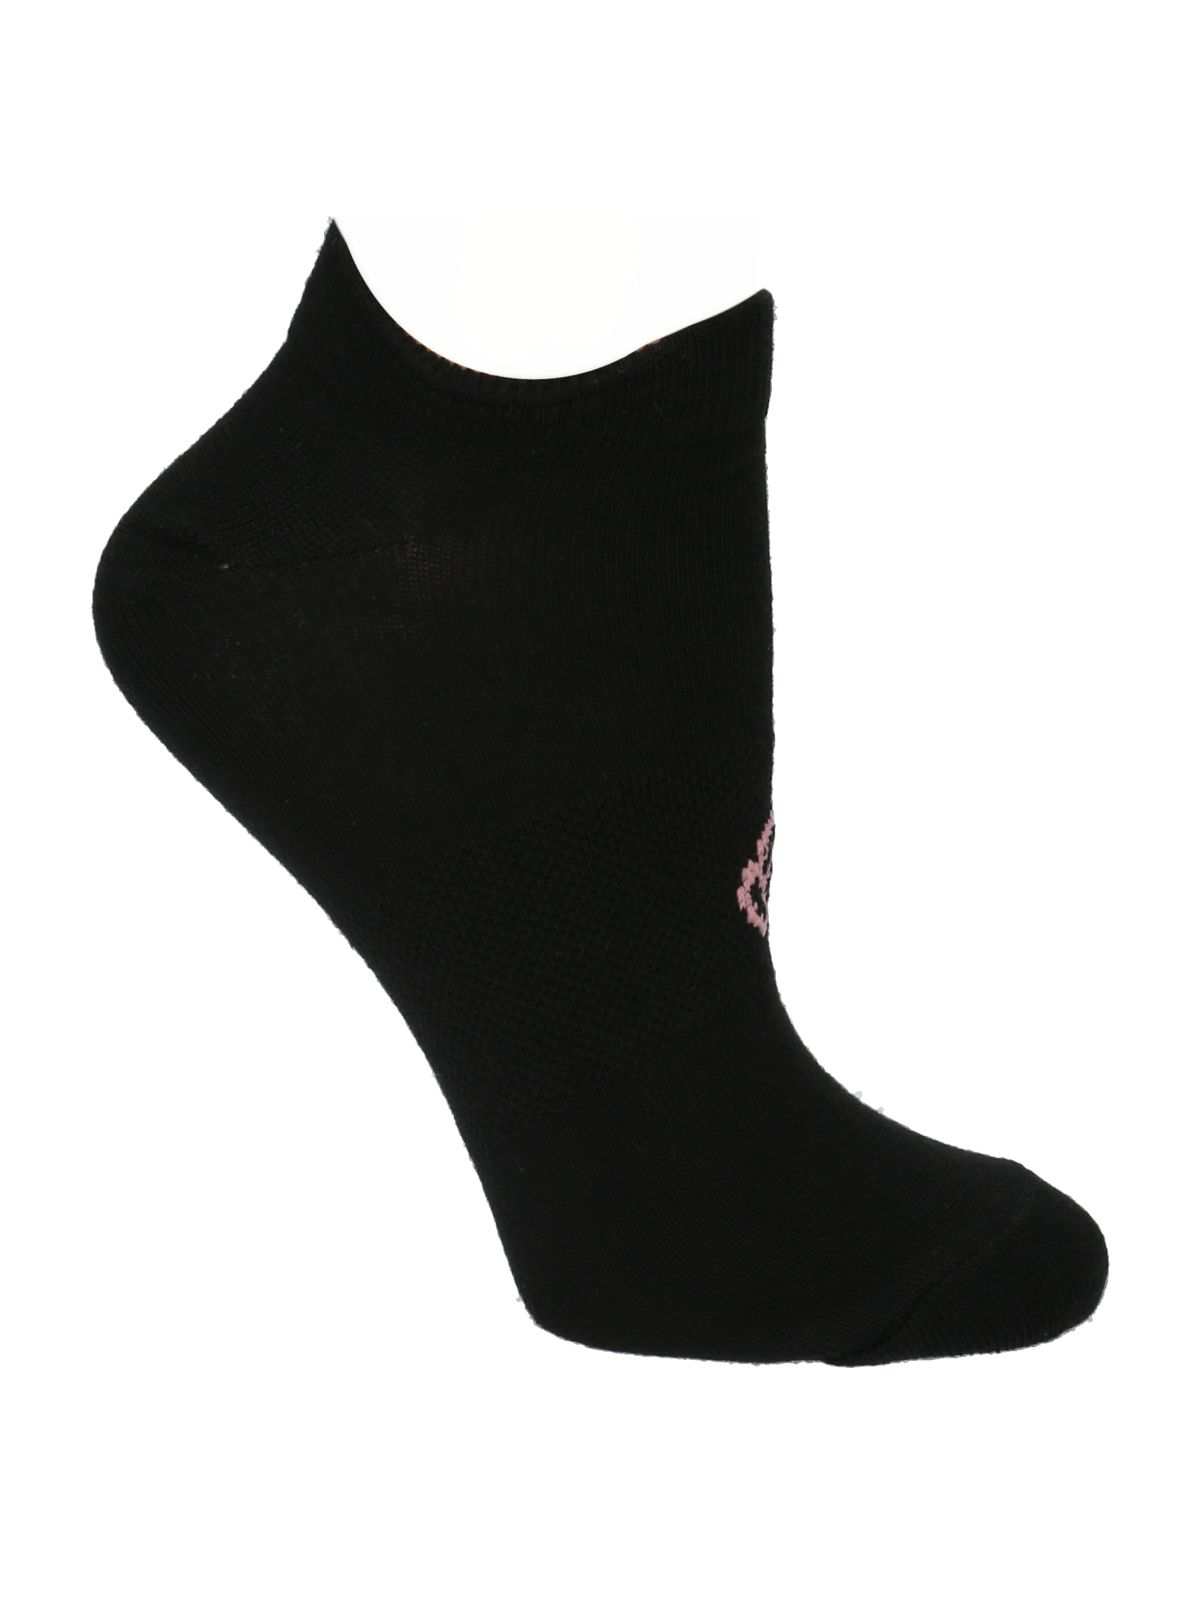 Pack 3 Calcetines Mujer Low Cut Cata